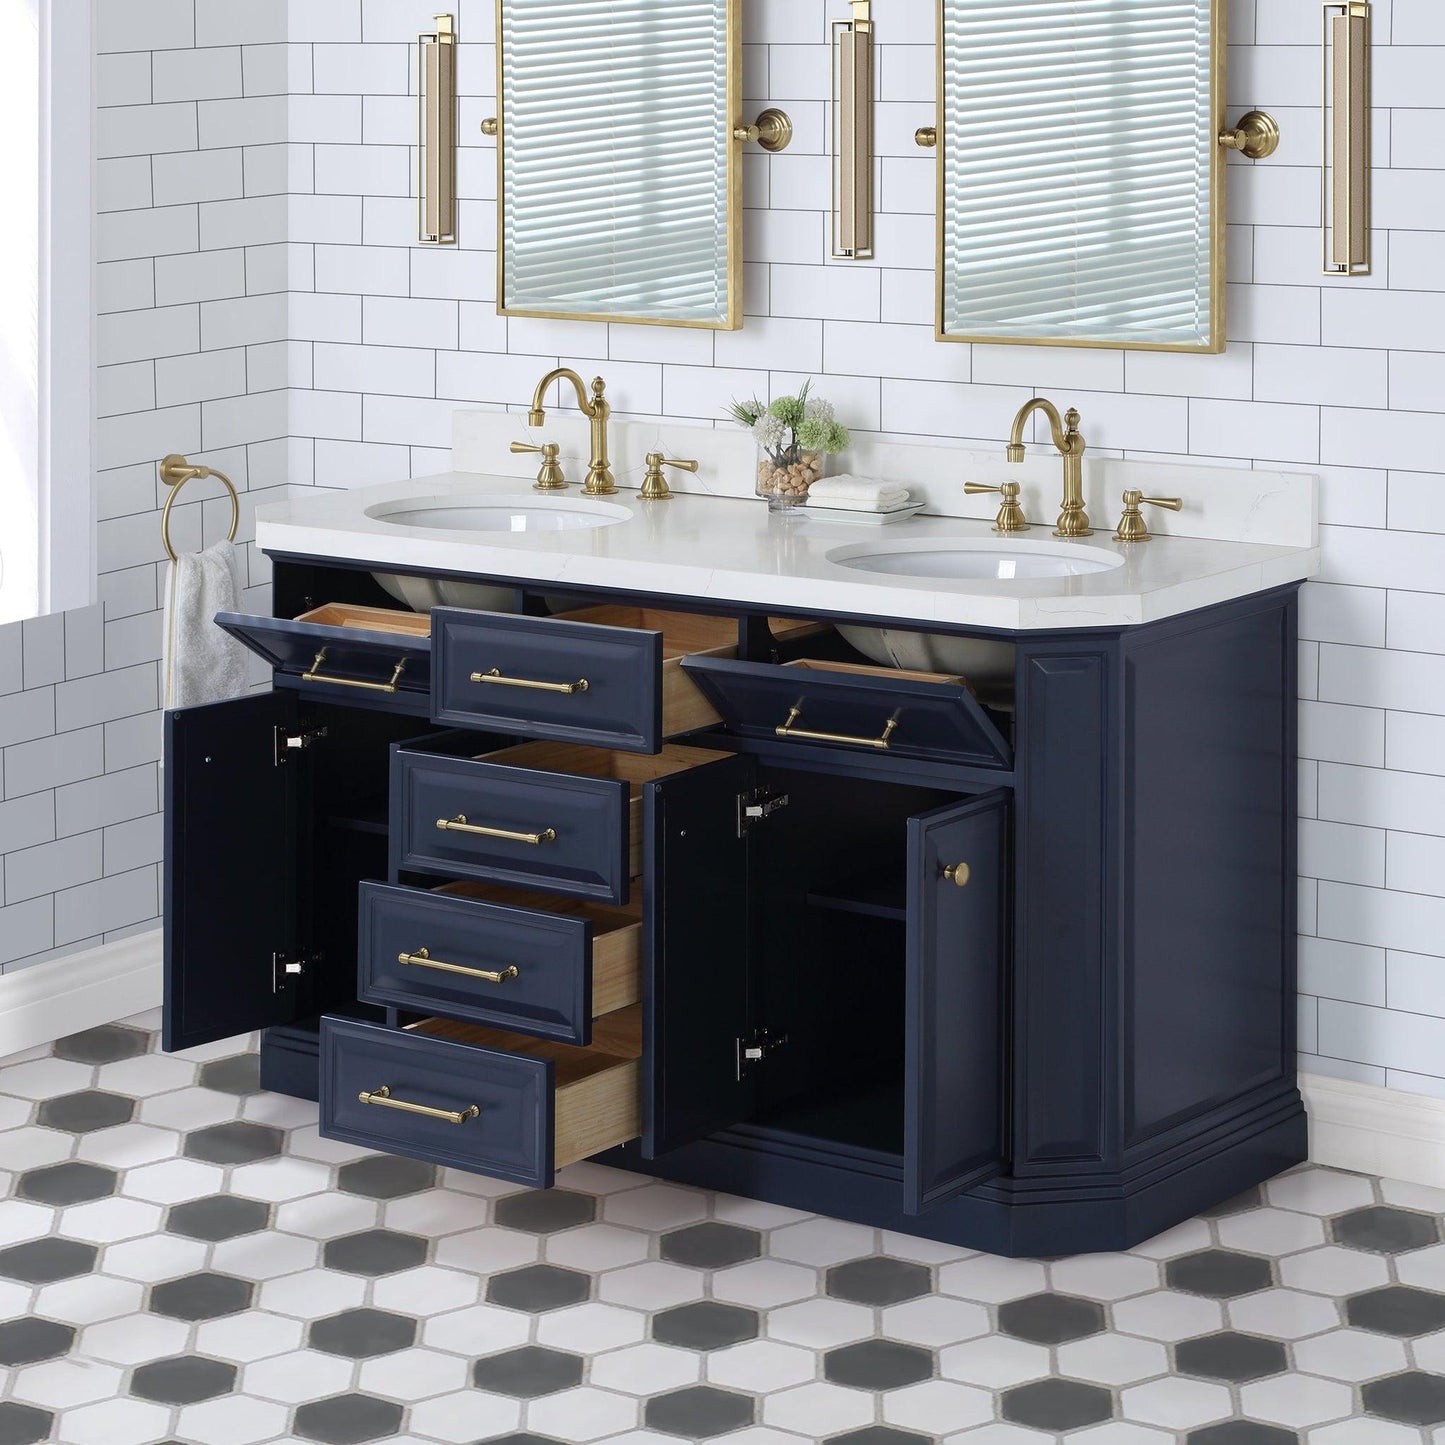 Water Creation Palace 60" Double Sink White Quartz Countertop Vanity in Monarch Blue